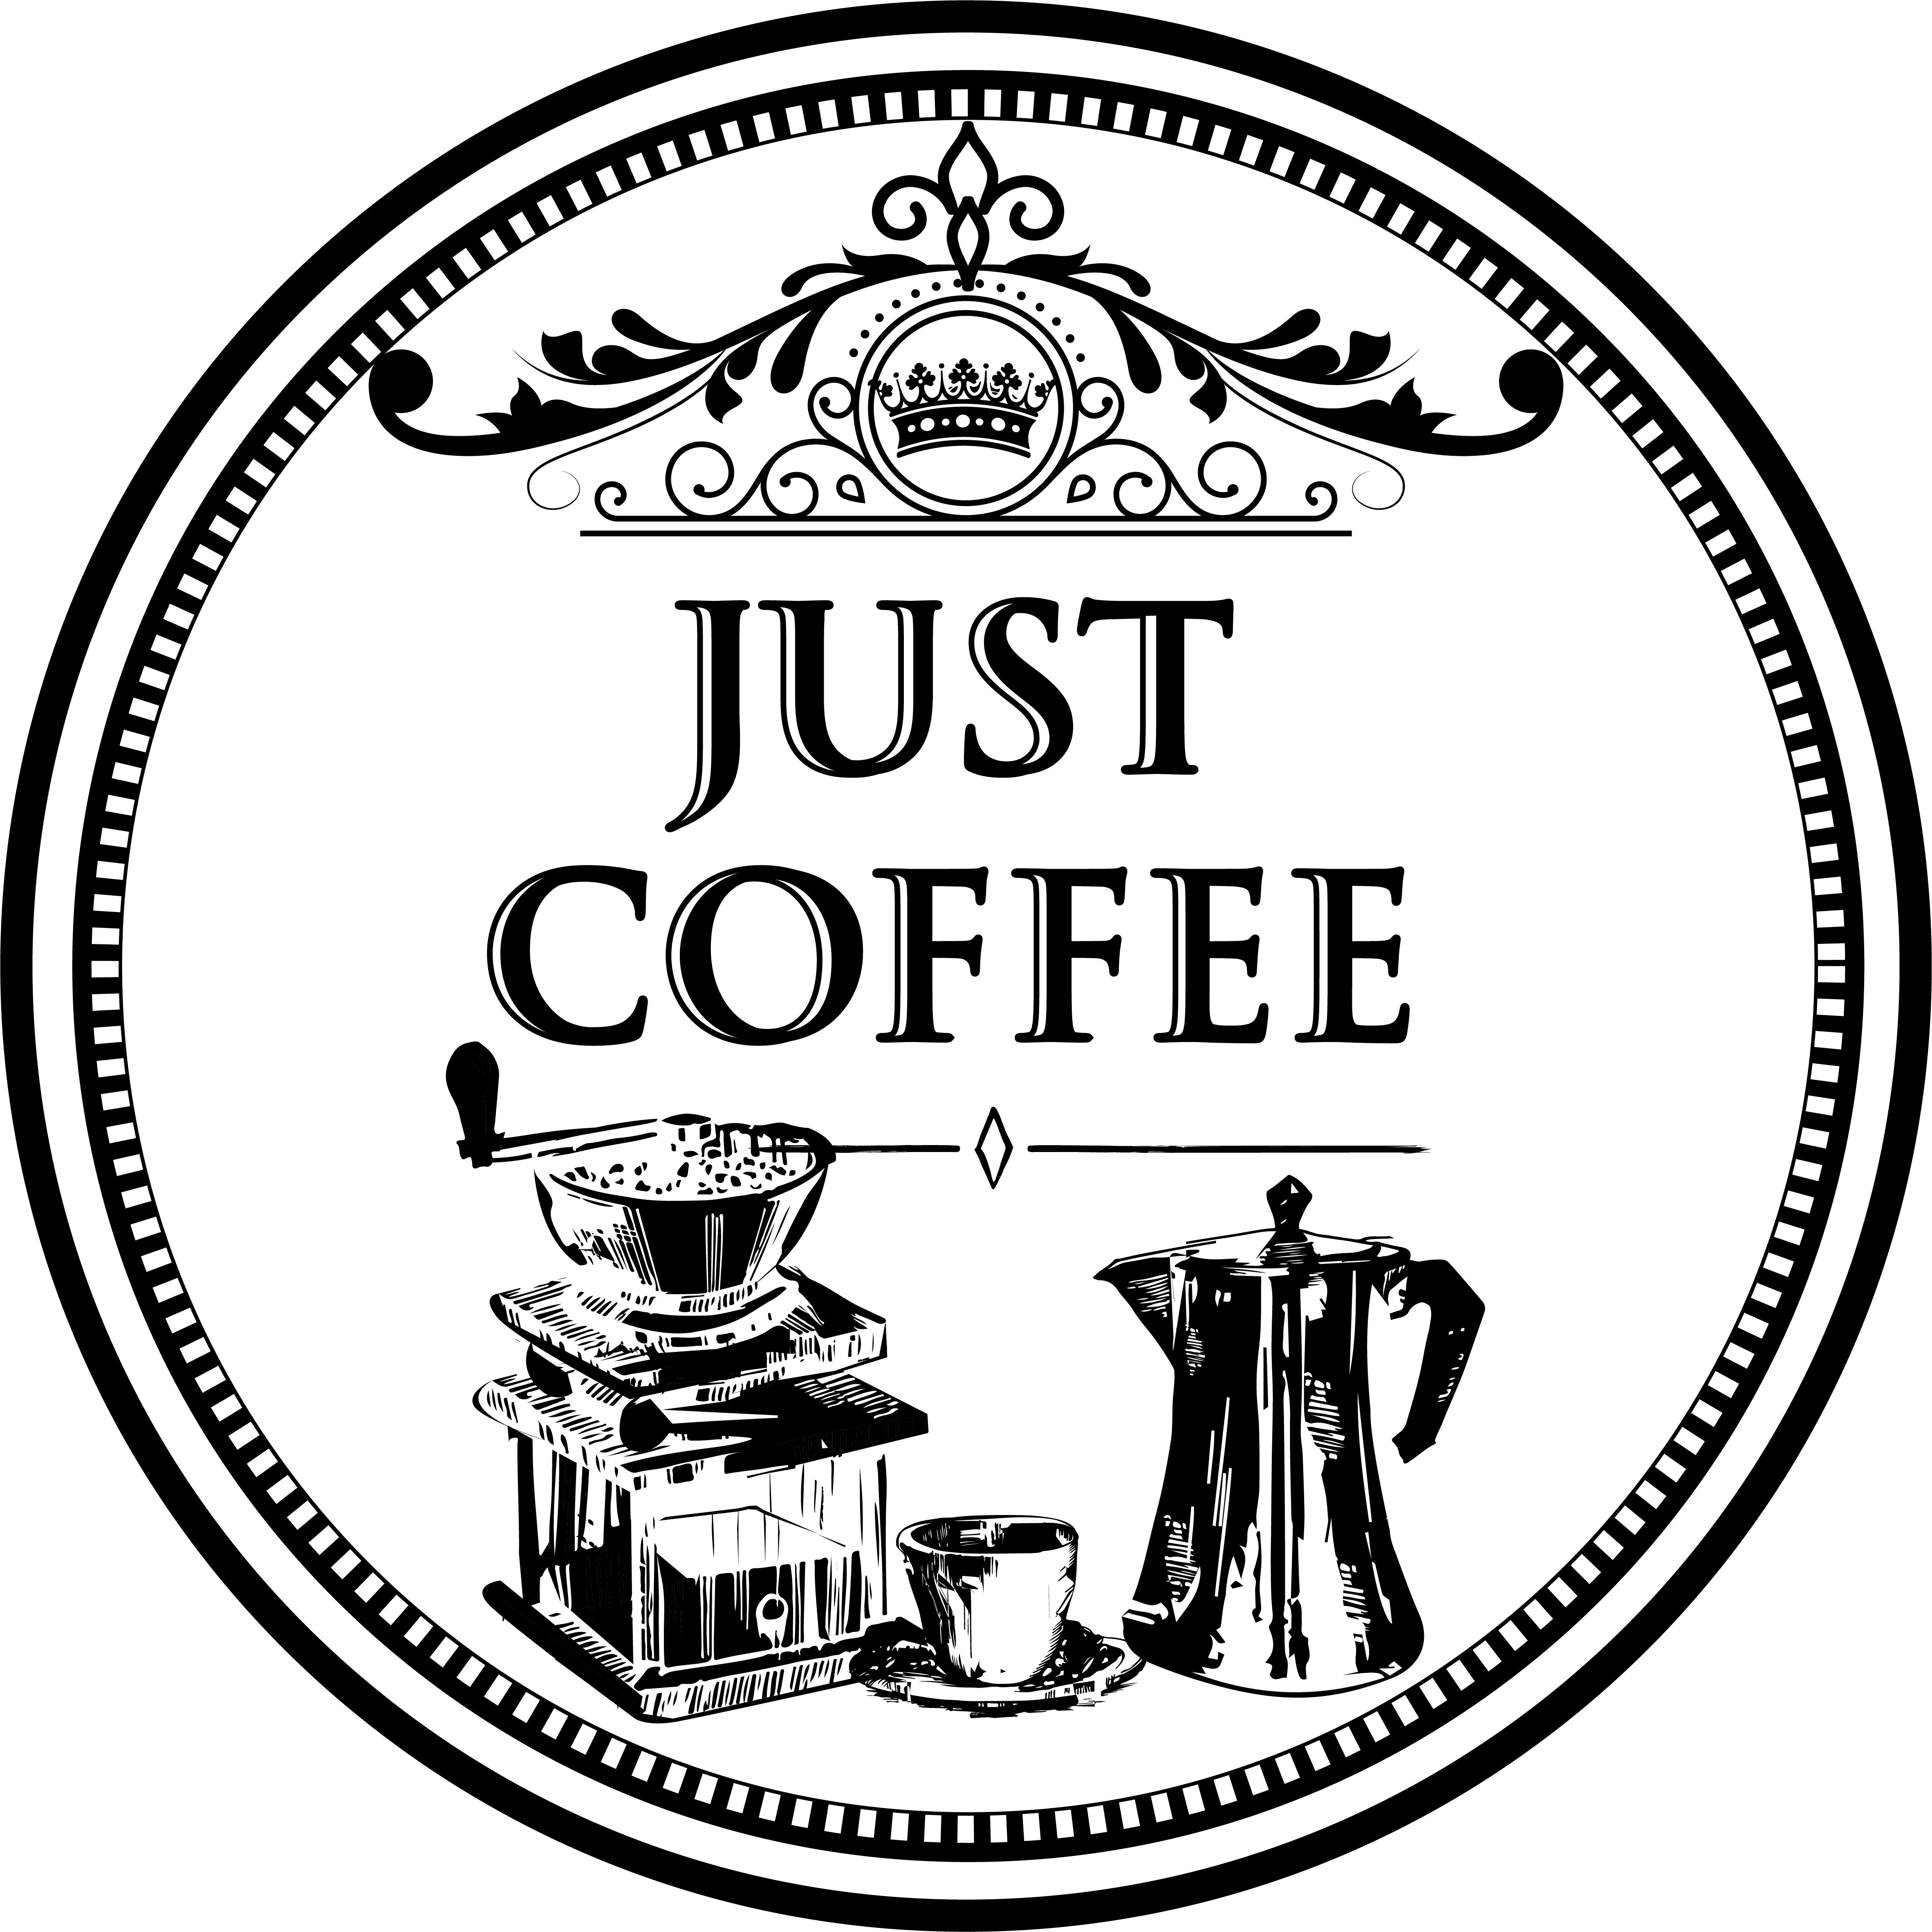 JUST COFFEE